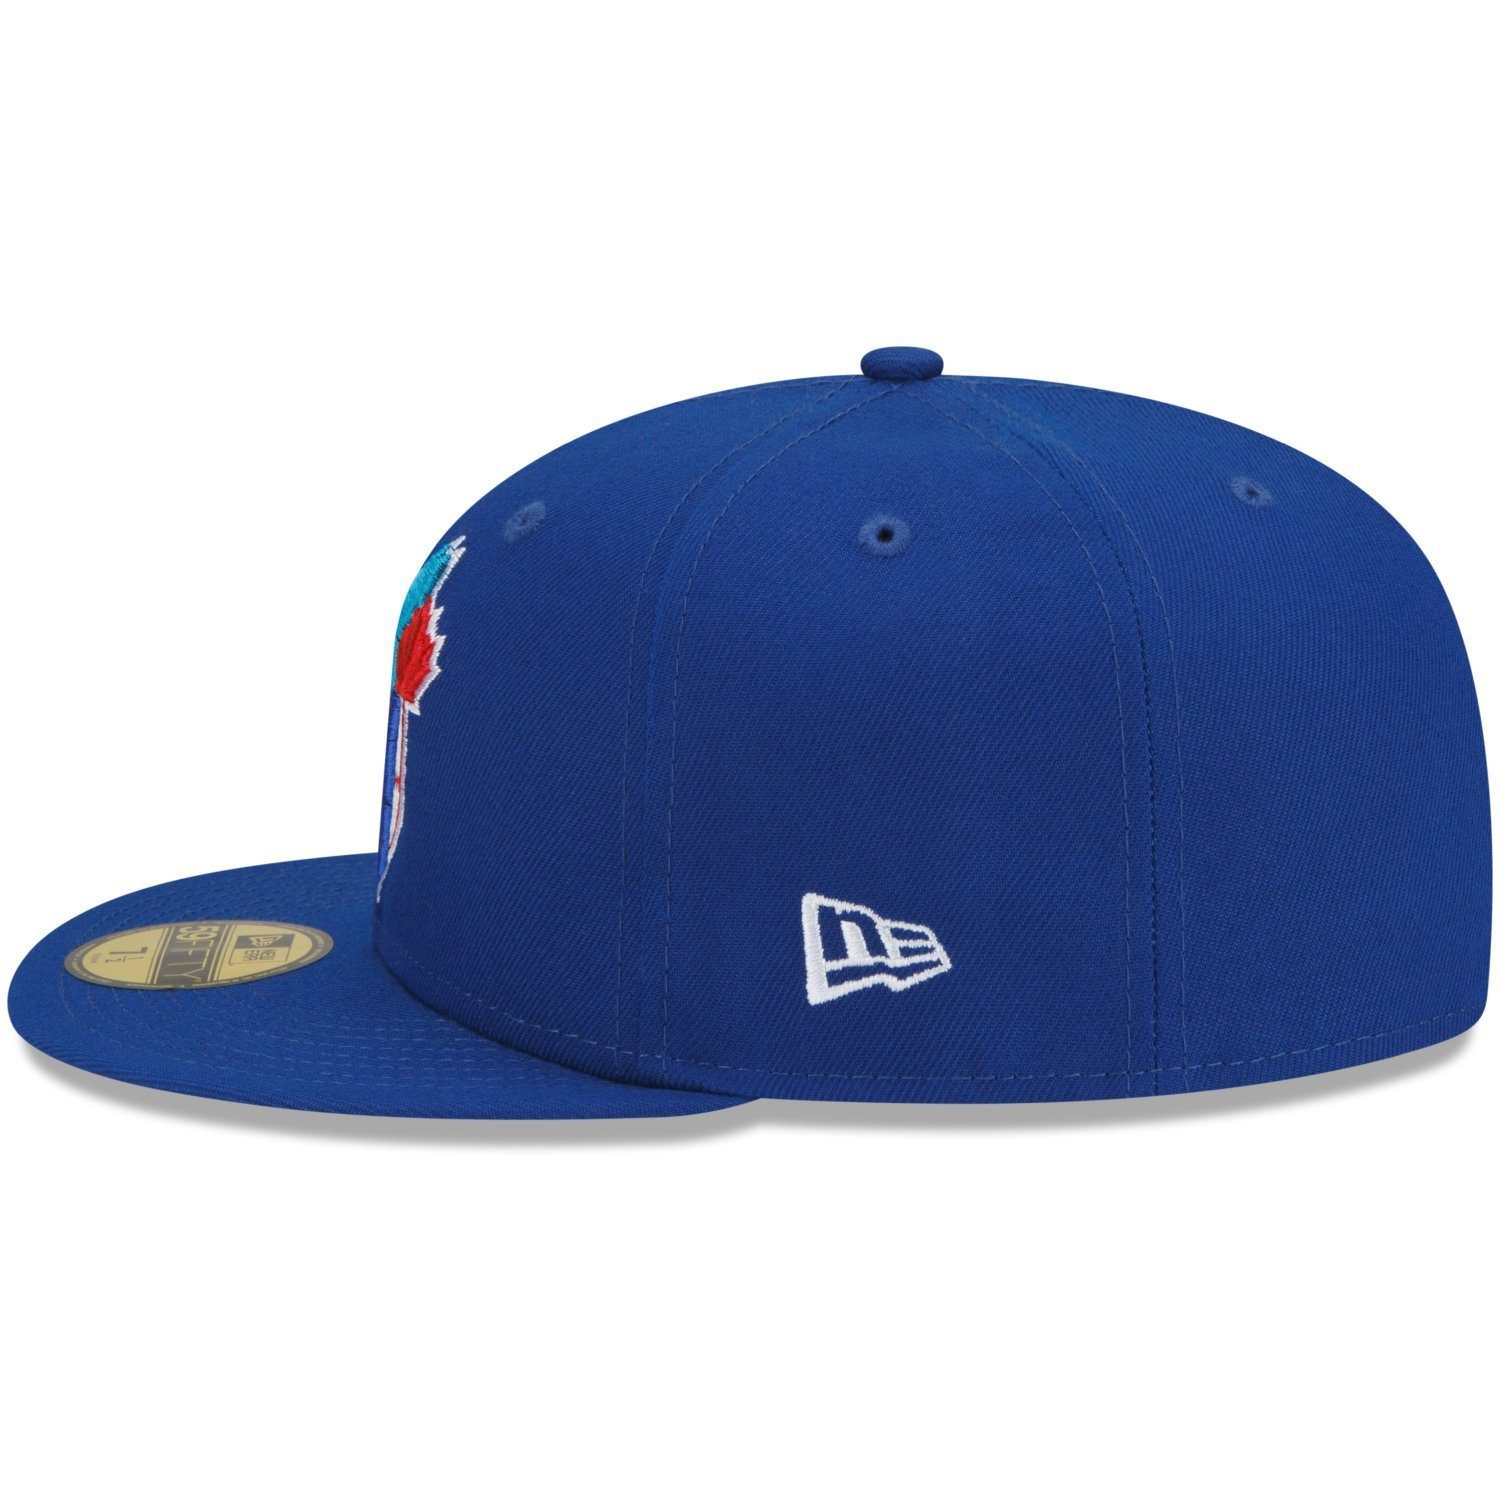 New Era 59Fifty Toronto CLUSTER CITY Jays Cap Fitted